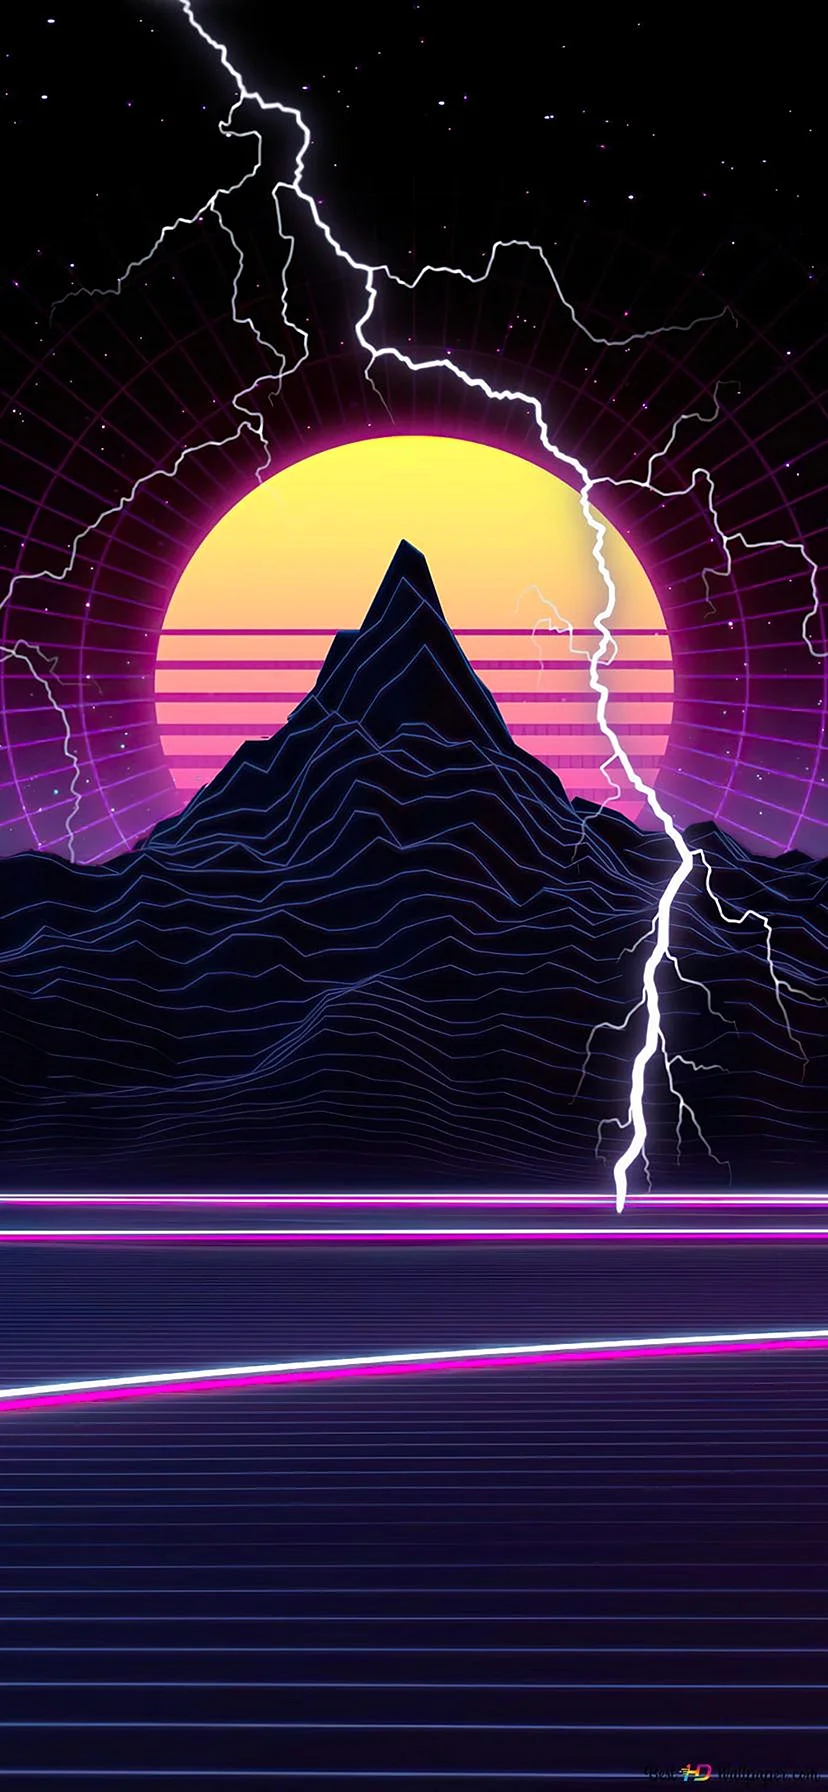 Retrowave Wallpaper for iPhone 11